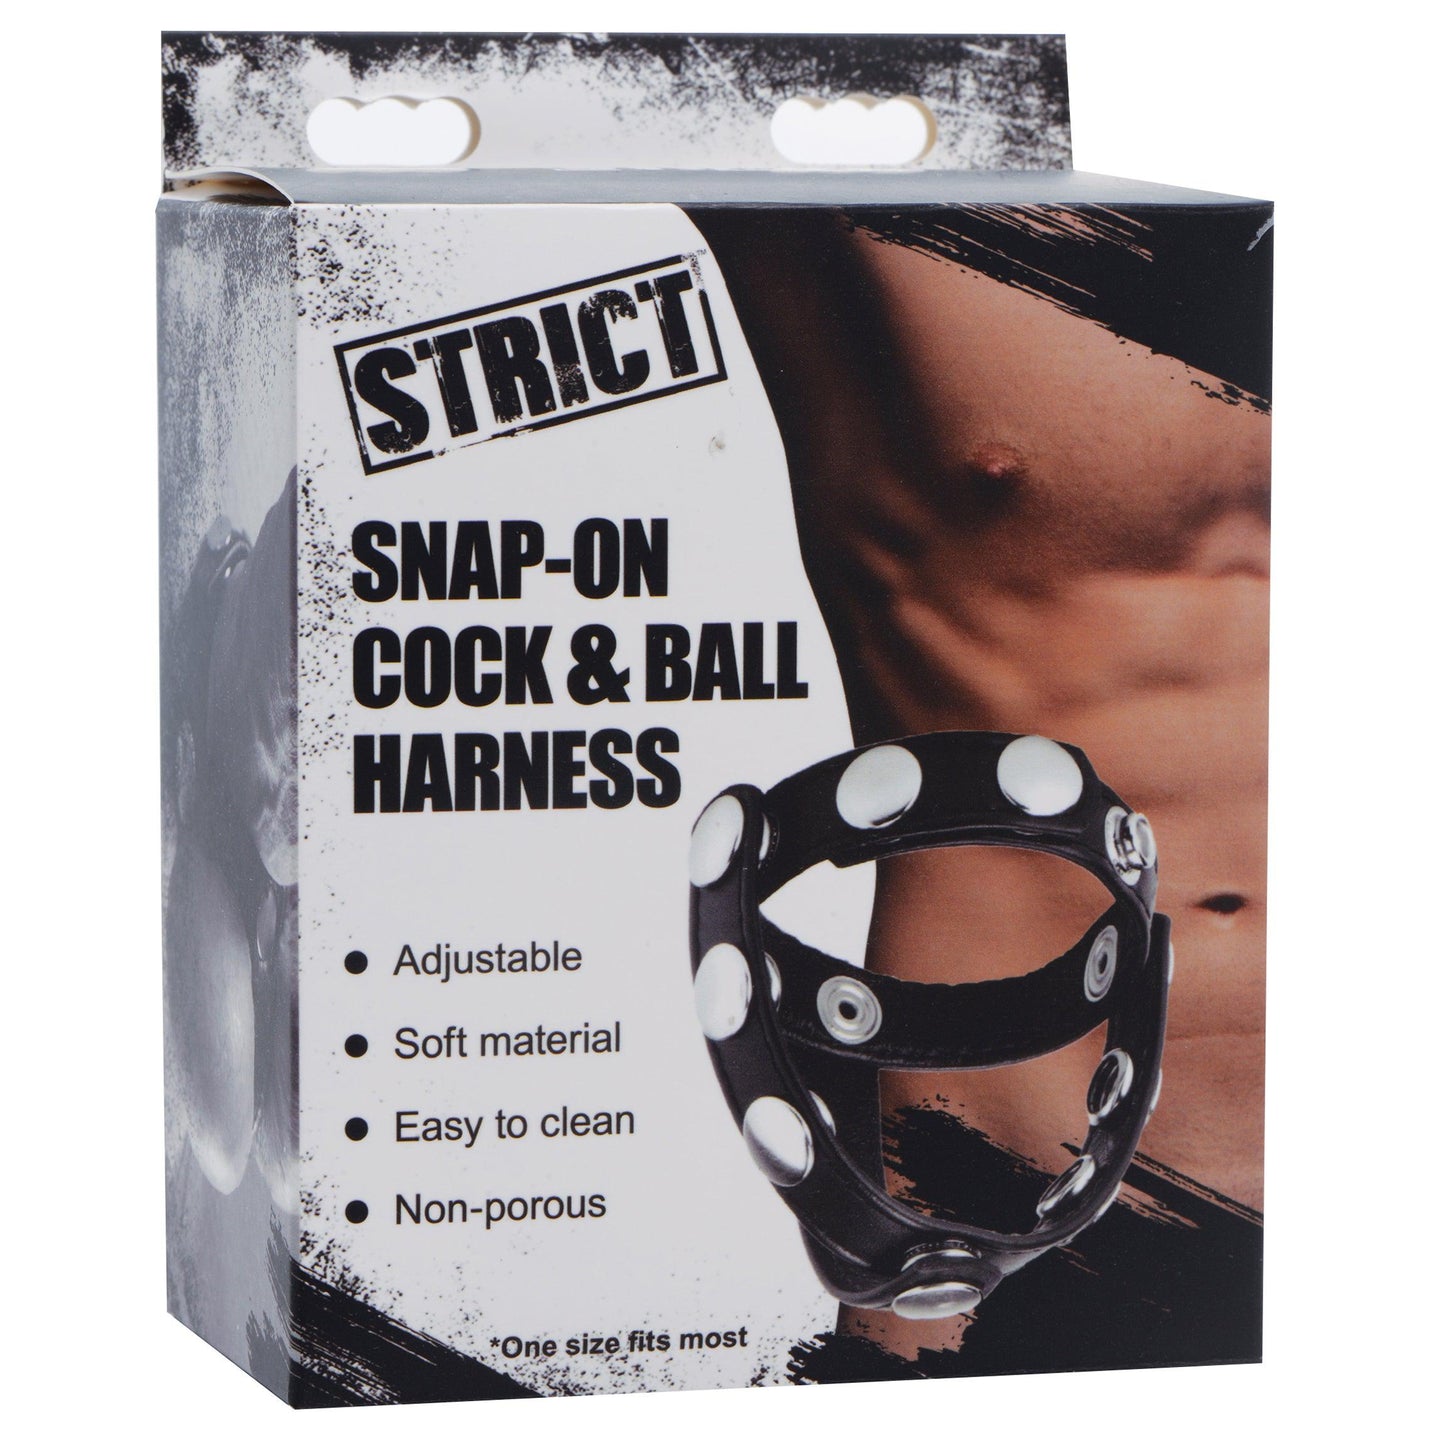 Snap- on Cock & Ball Harness